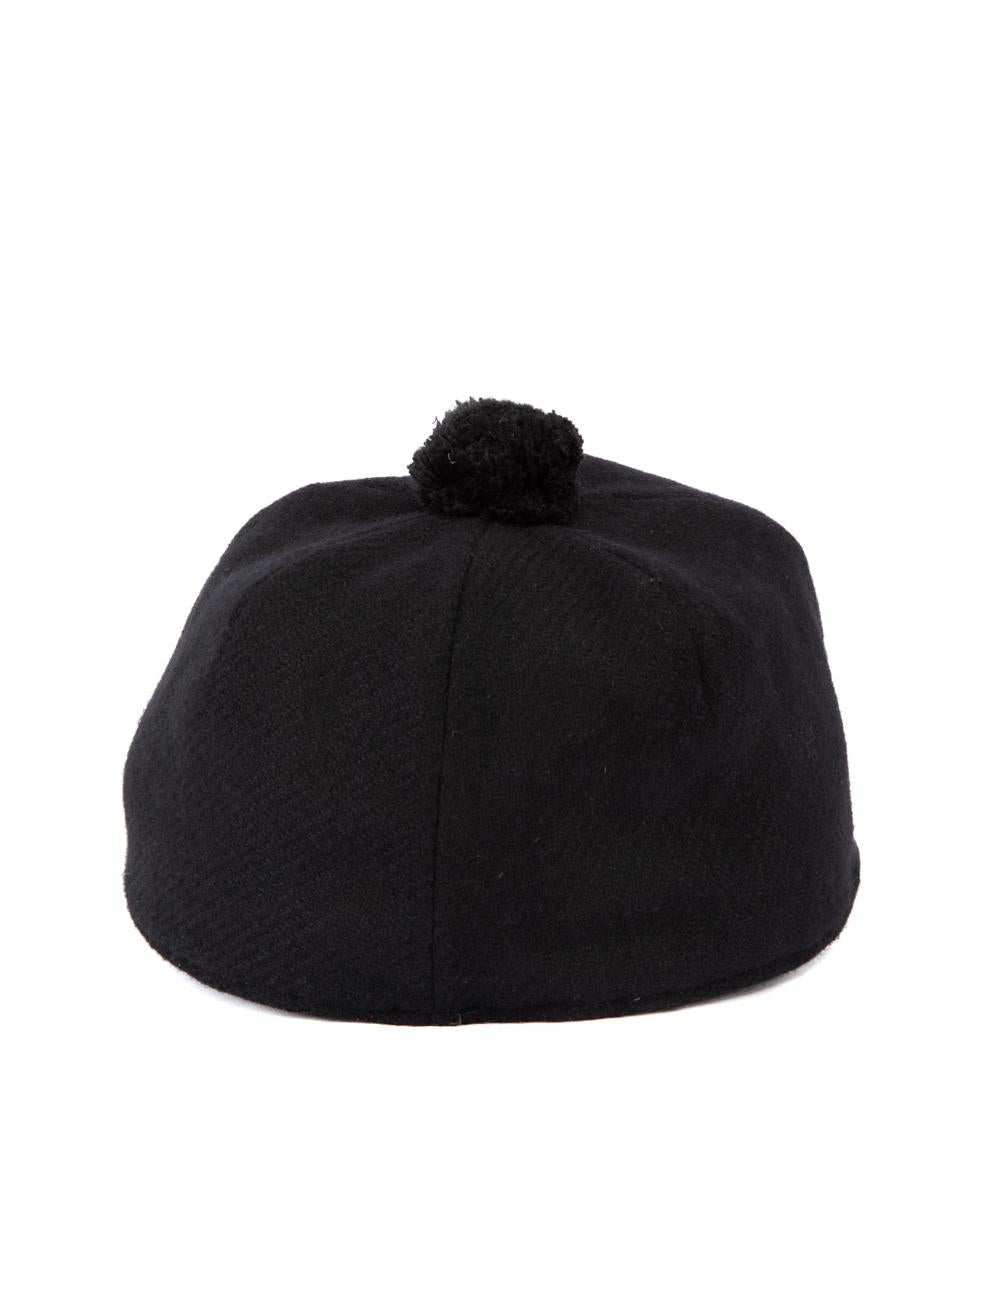 Burberry Women's Black Pom Pom Accent Newsboy Hat In Excellent Condition In London, GB